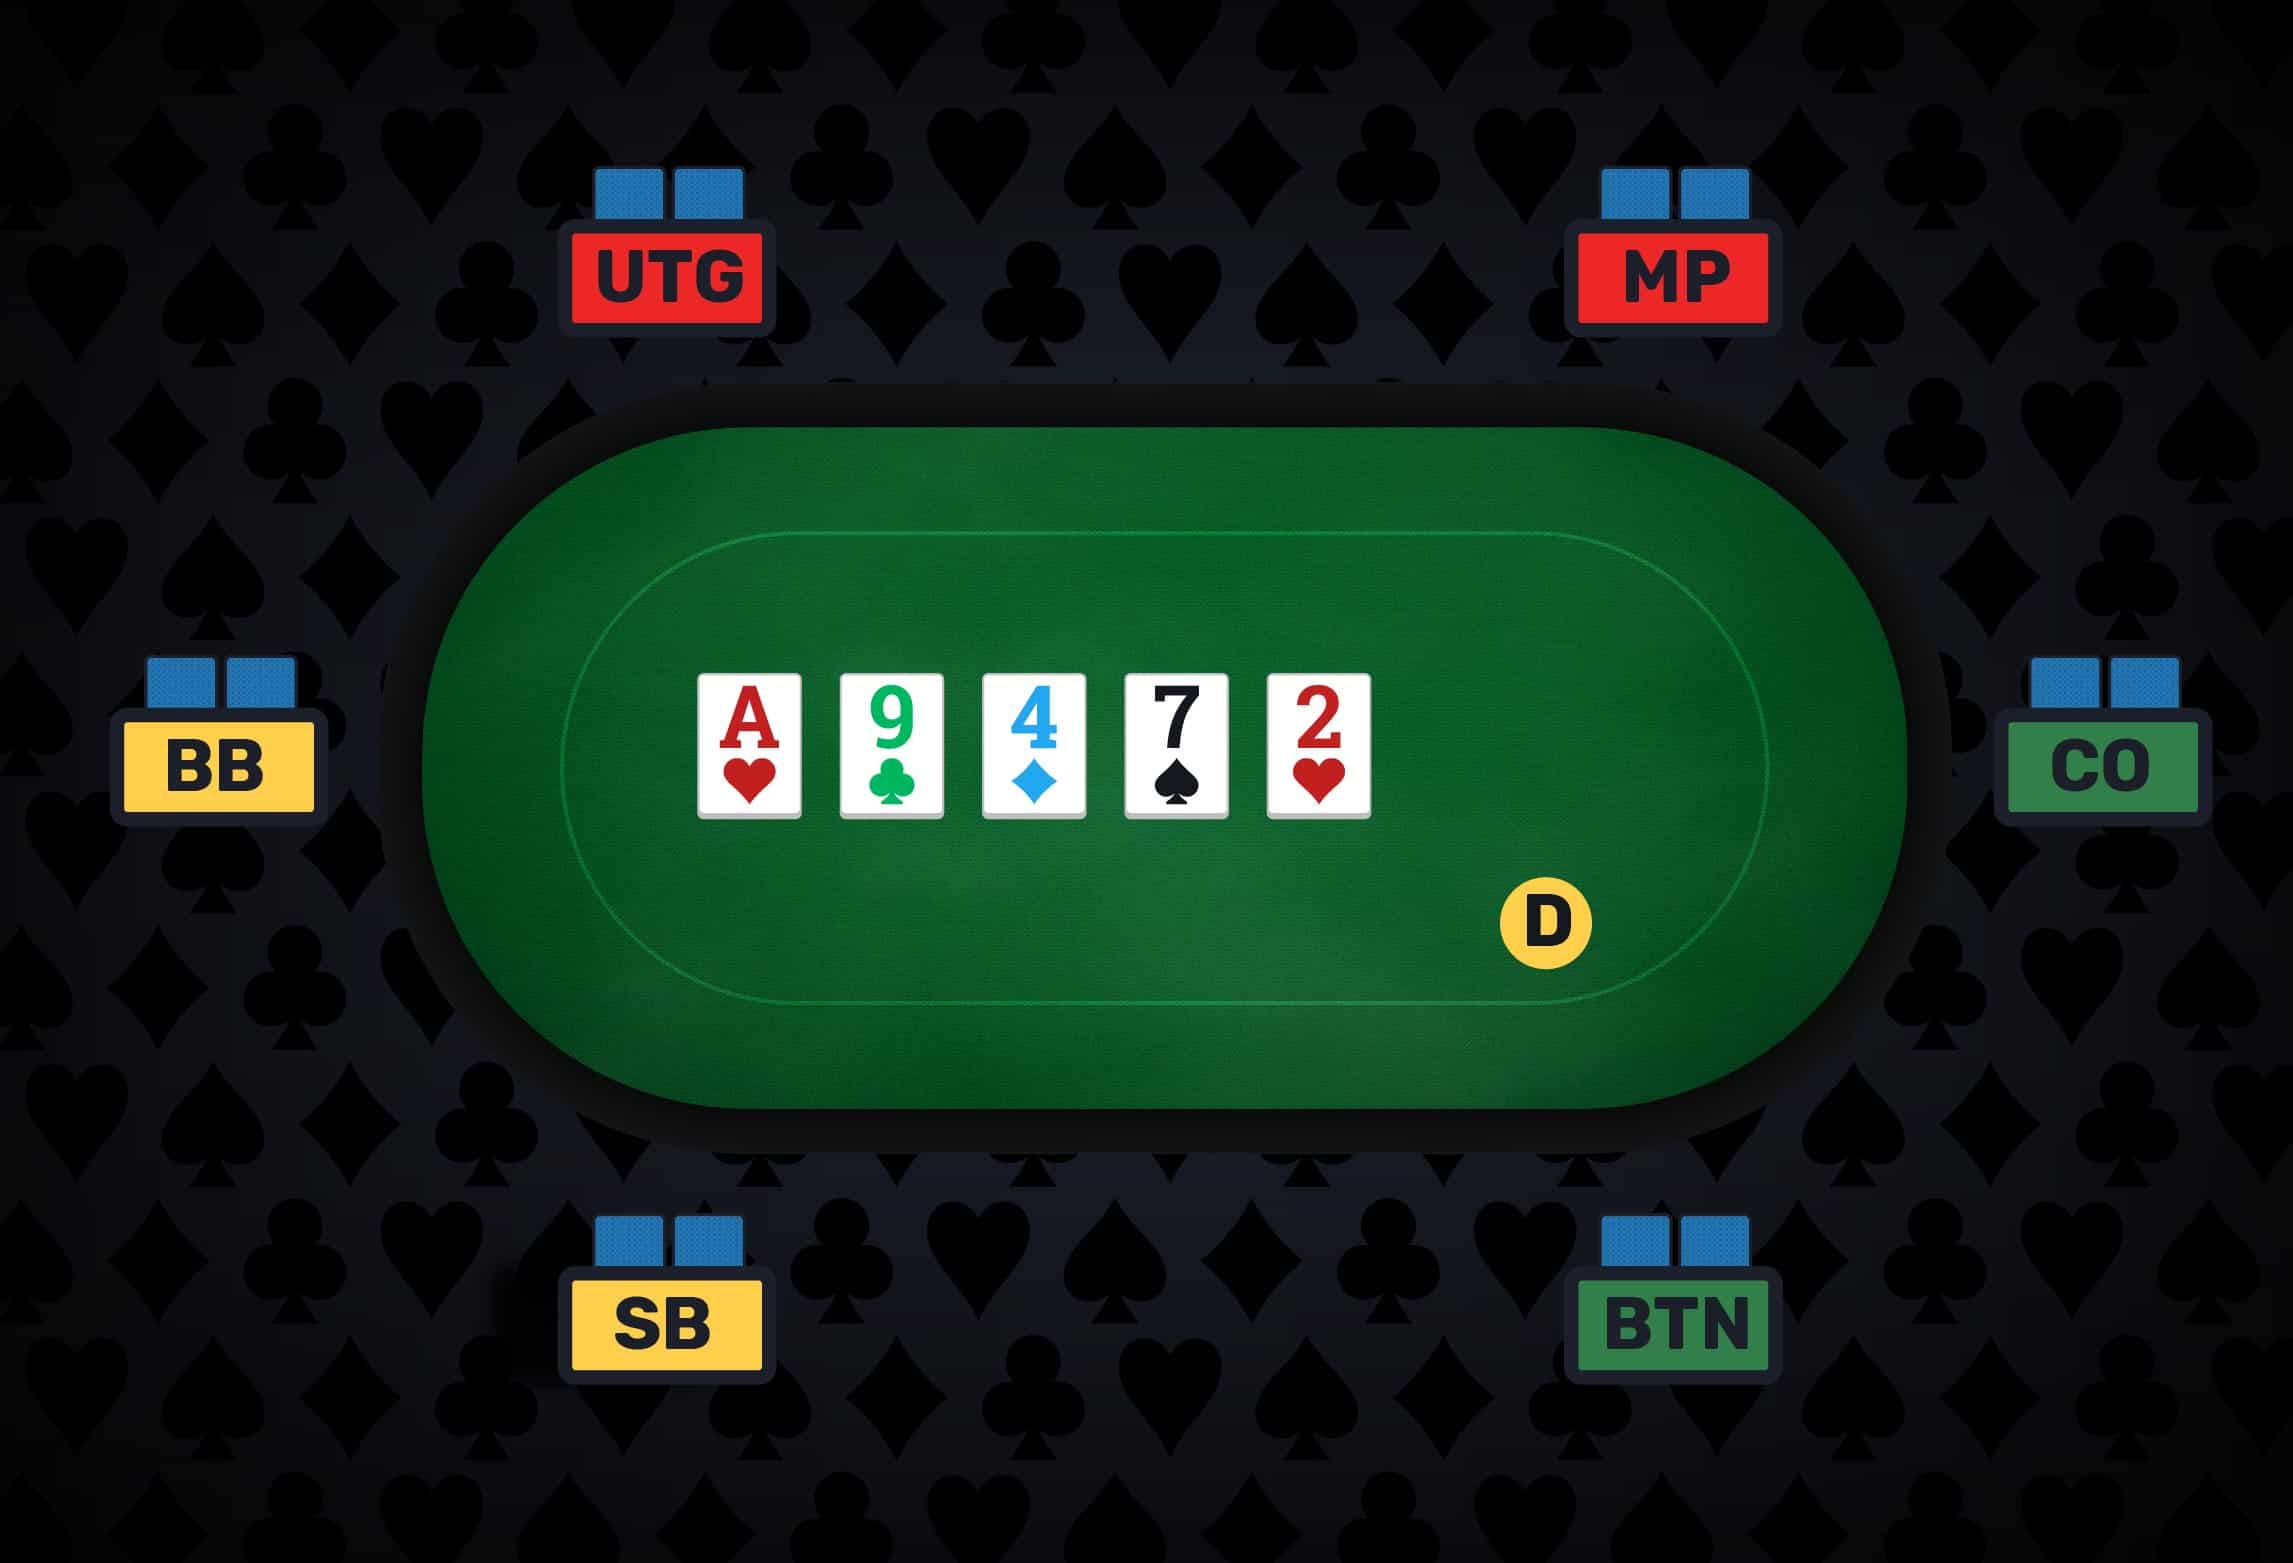 Beginner's Guide To No-Limit Hold'em Poker